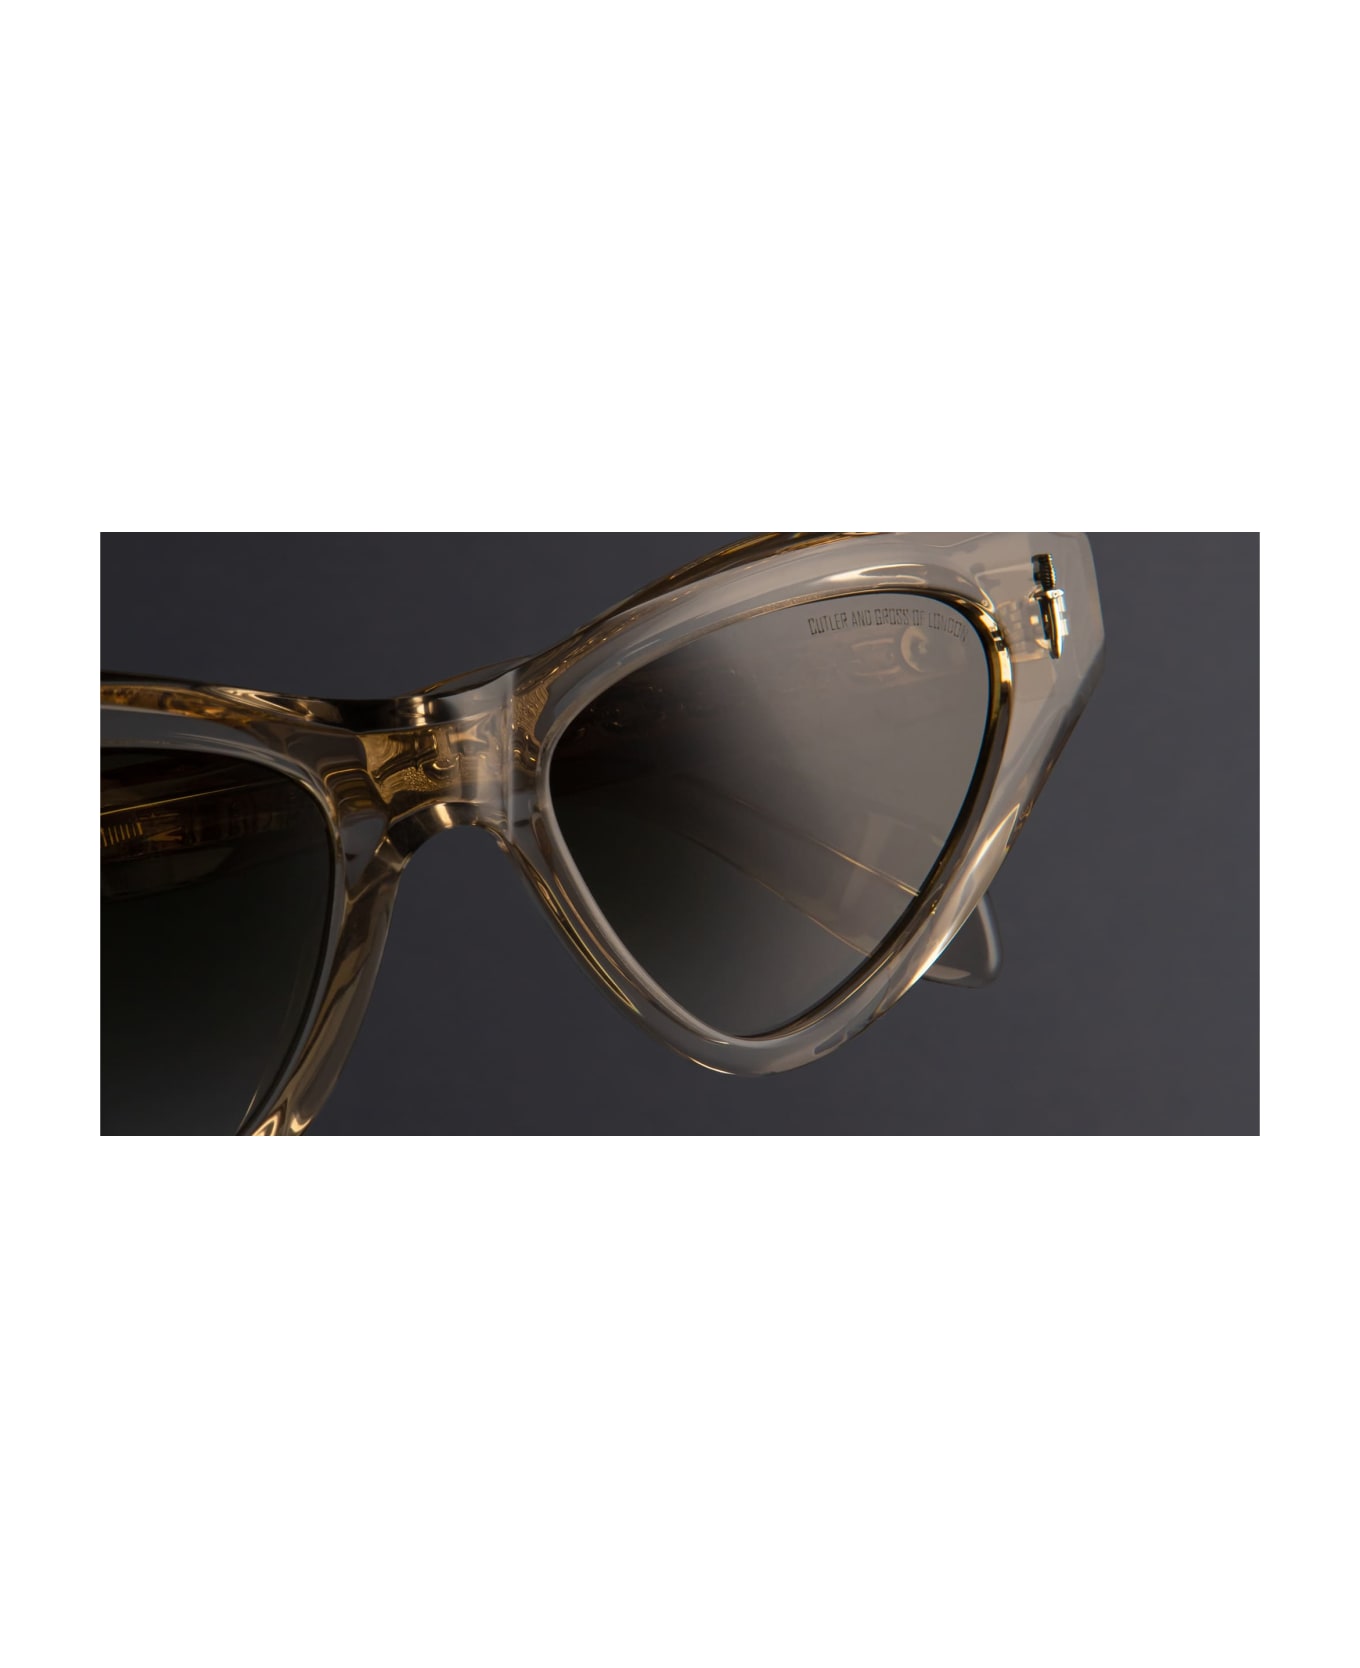 Cutler and Gross The Great Frog - Mini / Sand Crystal Sunglasses - transparent beige